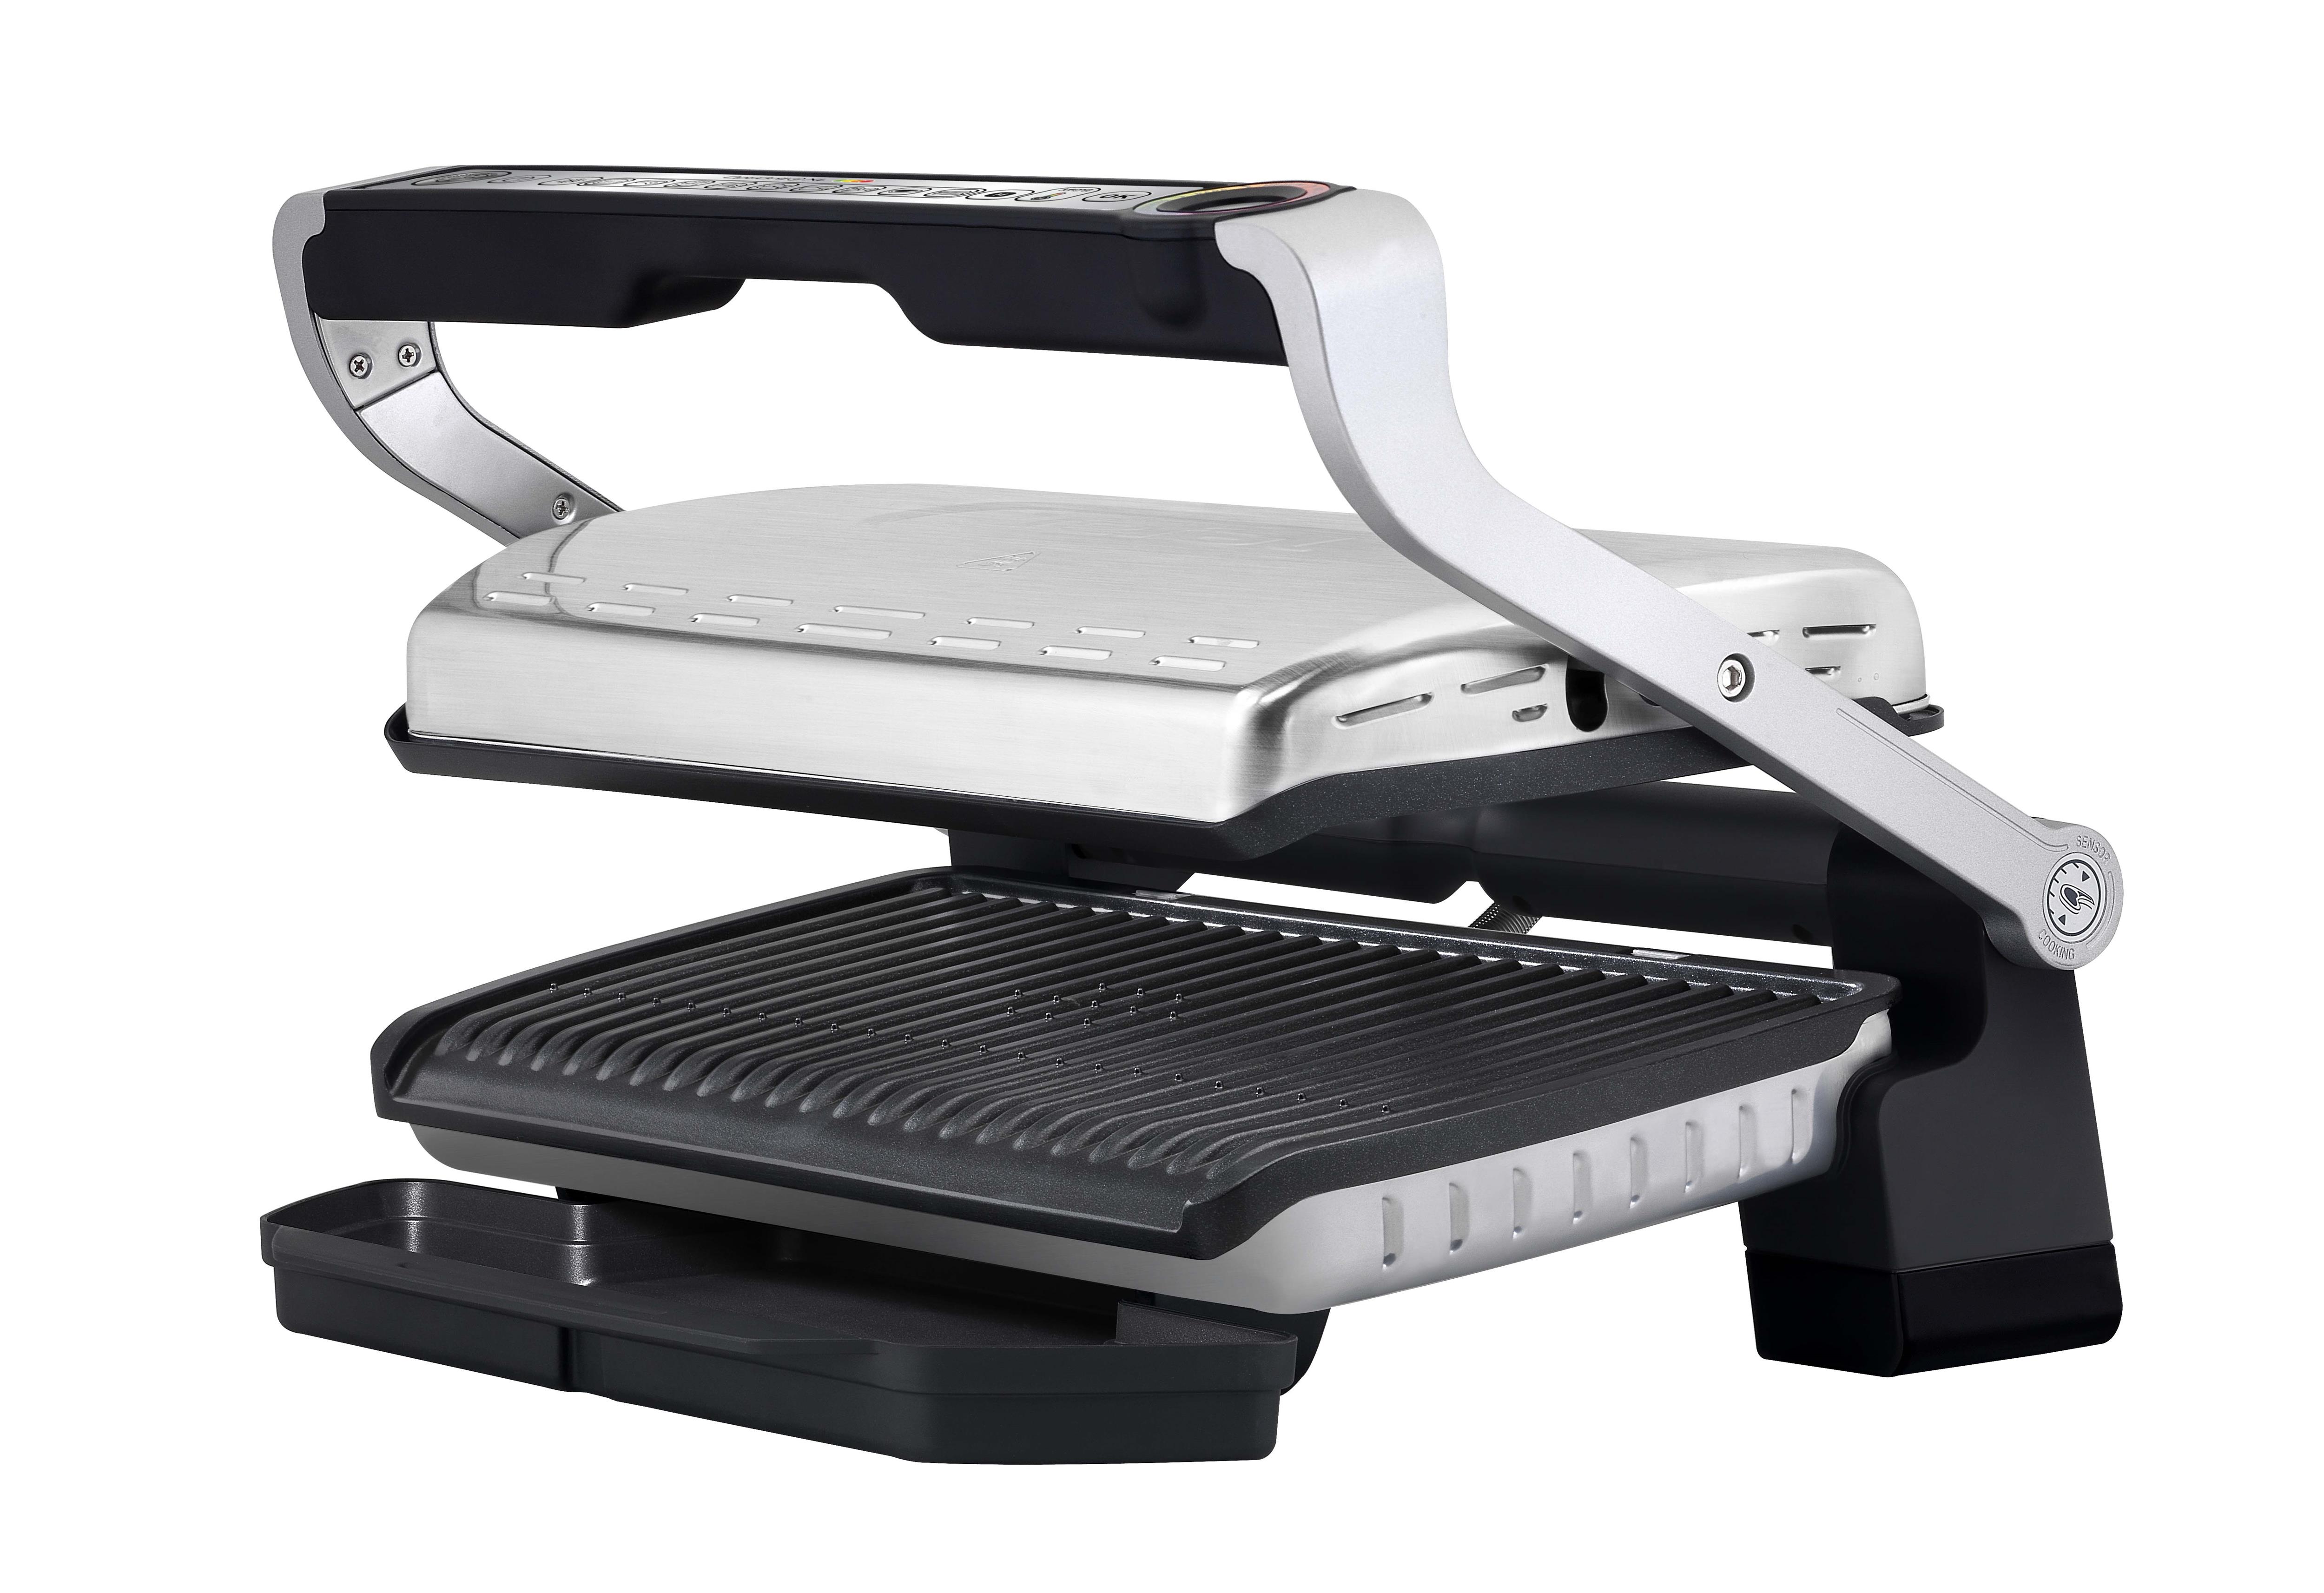 Tefal GC722D Optigrill + XL black stainless steel - Top grill at